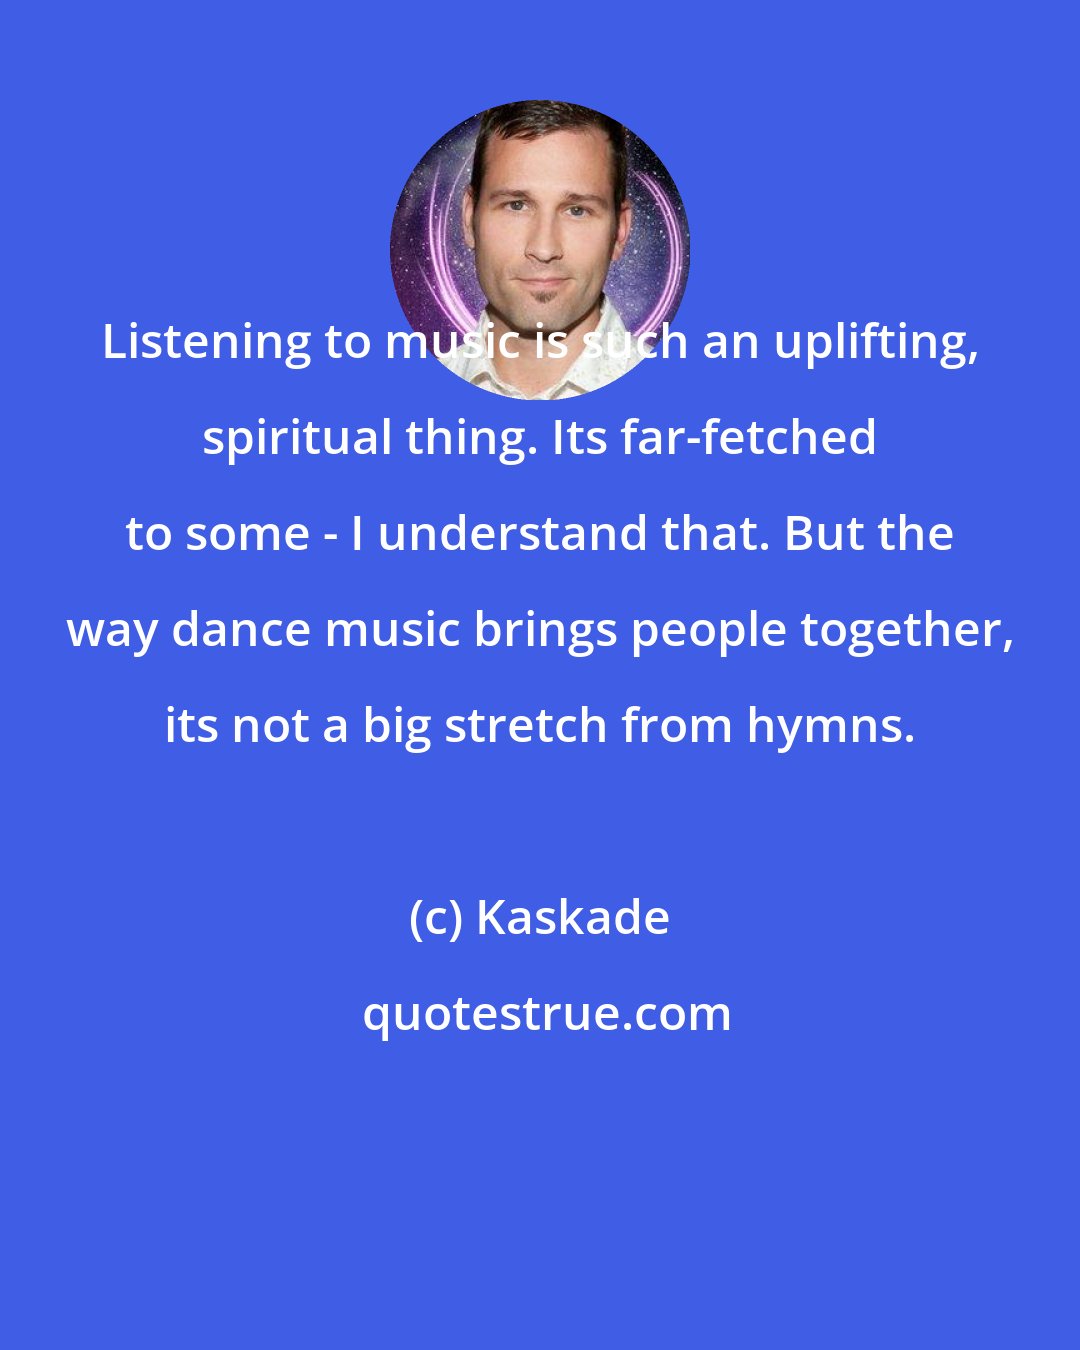 Kaskade: Listening to music is such an uplifting, spiritual thing. Its far-fetched to some - I understand that. But the way dance music brings people together, its not a big stretch from hymns.